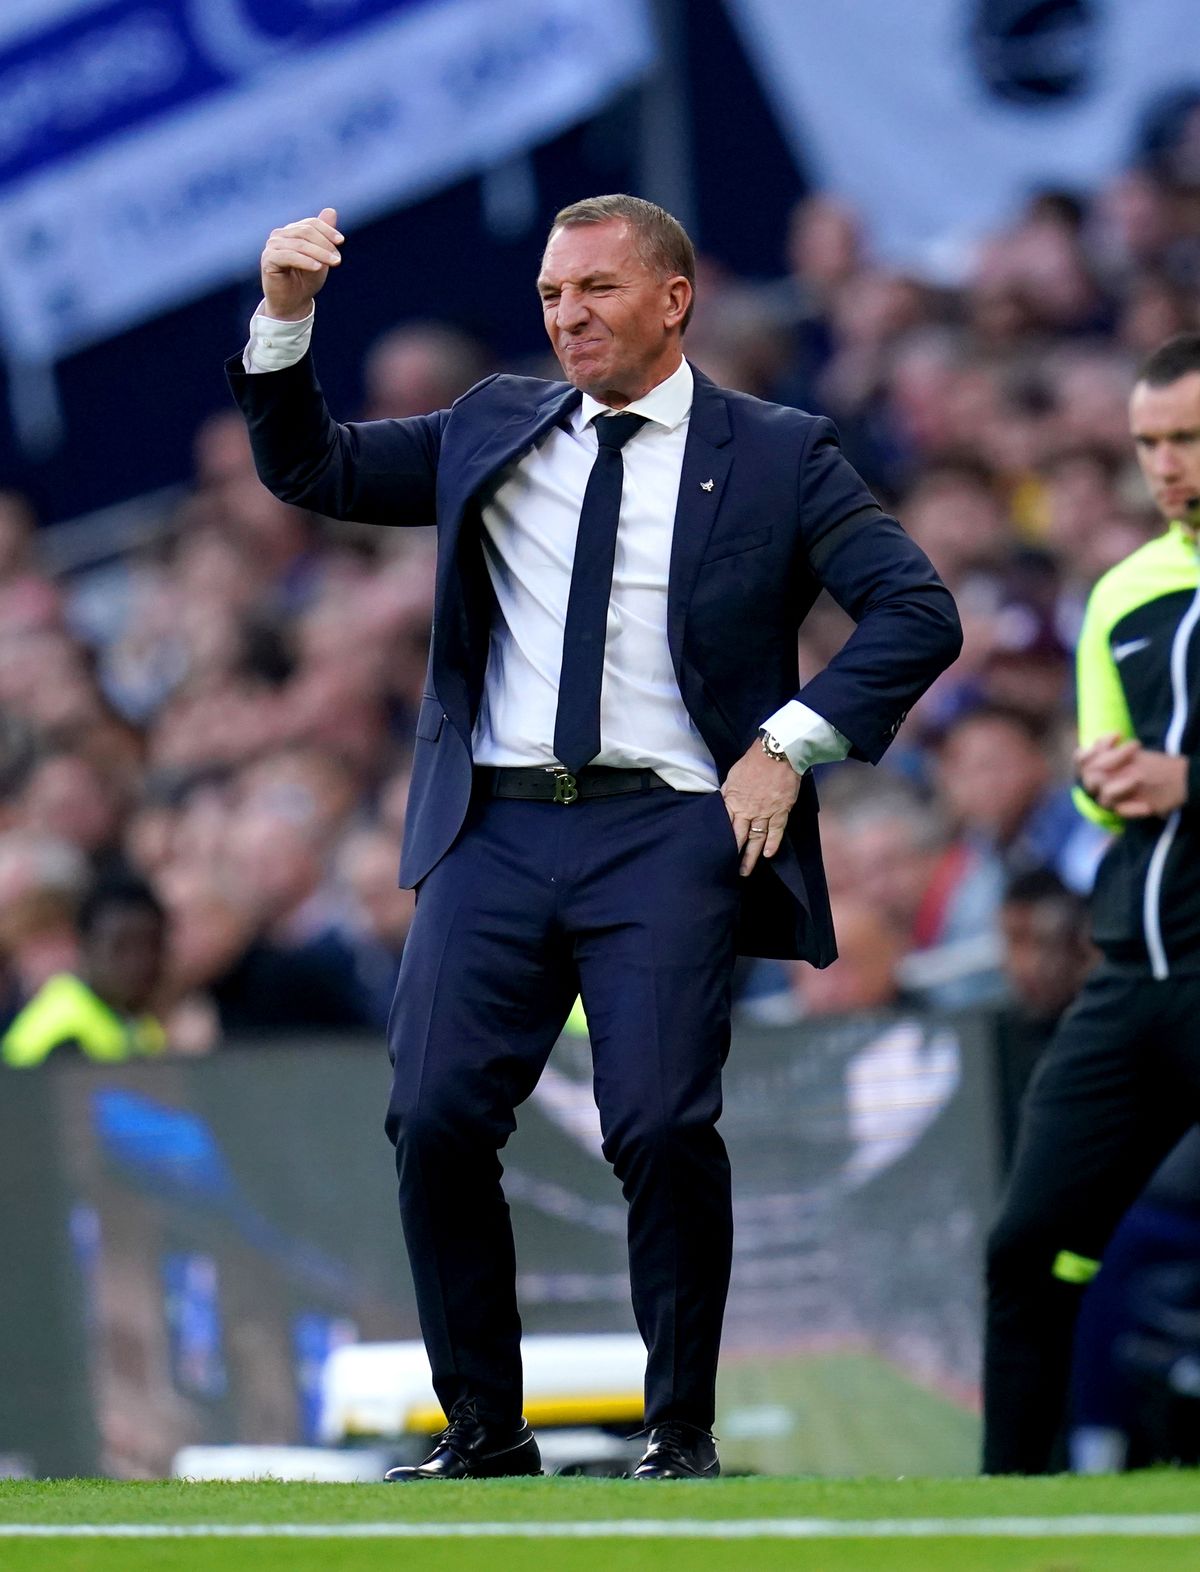 Owners trust me – Brendan Rodgers adamant he is right man for Leicester job